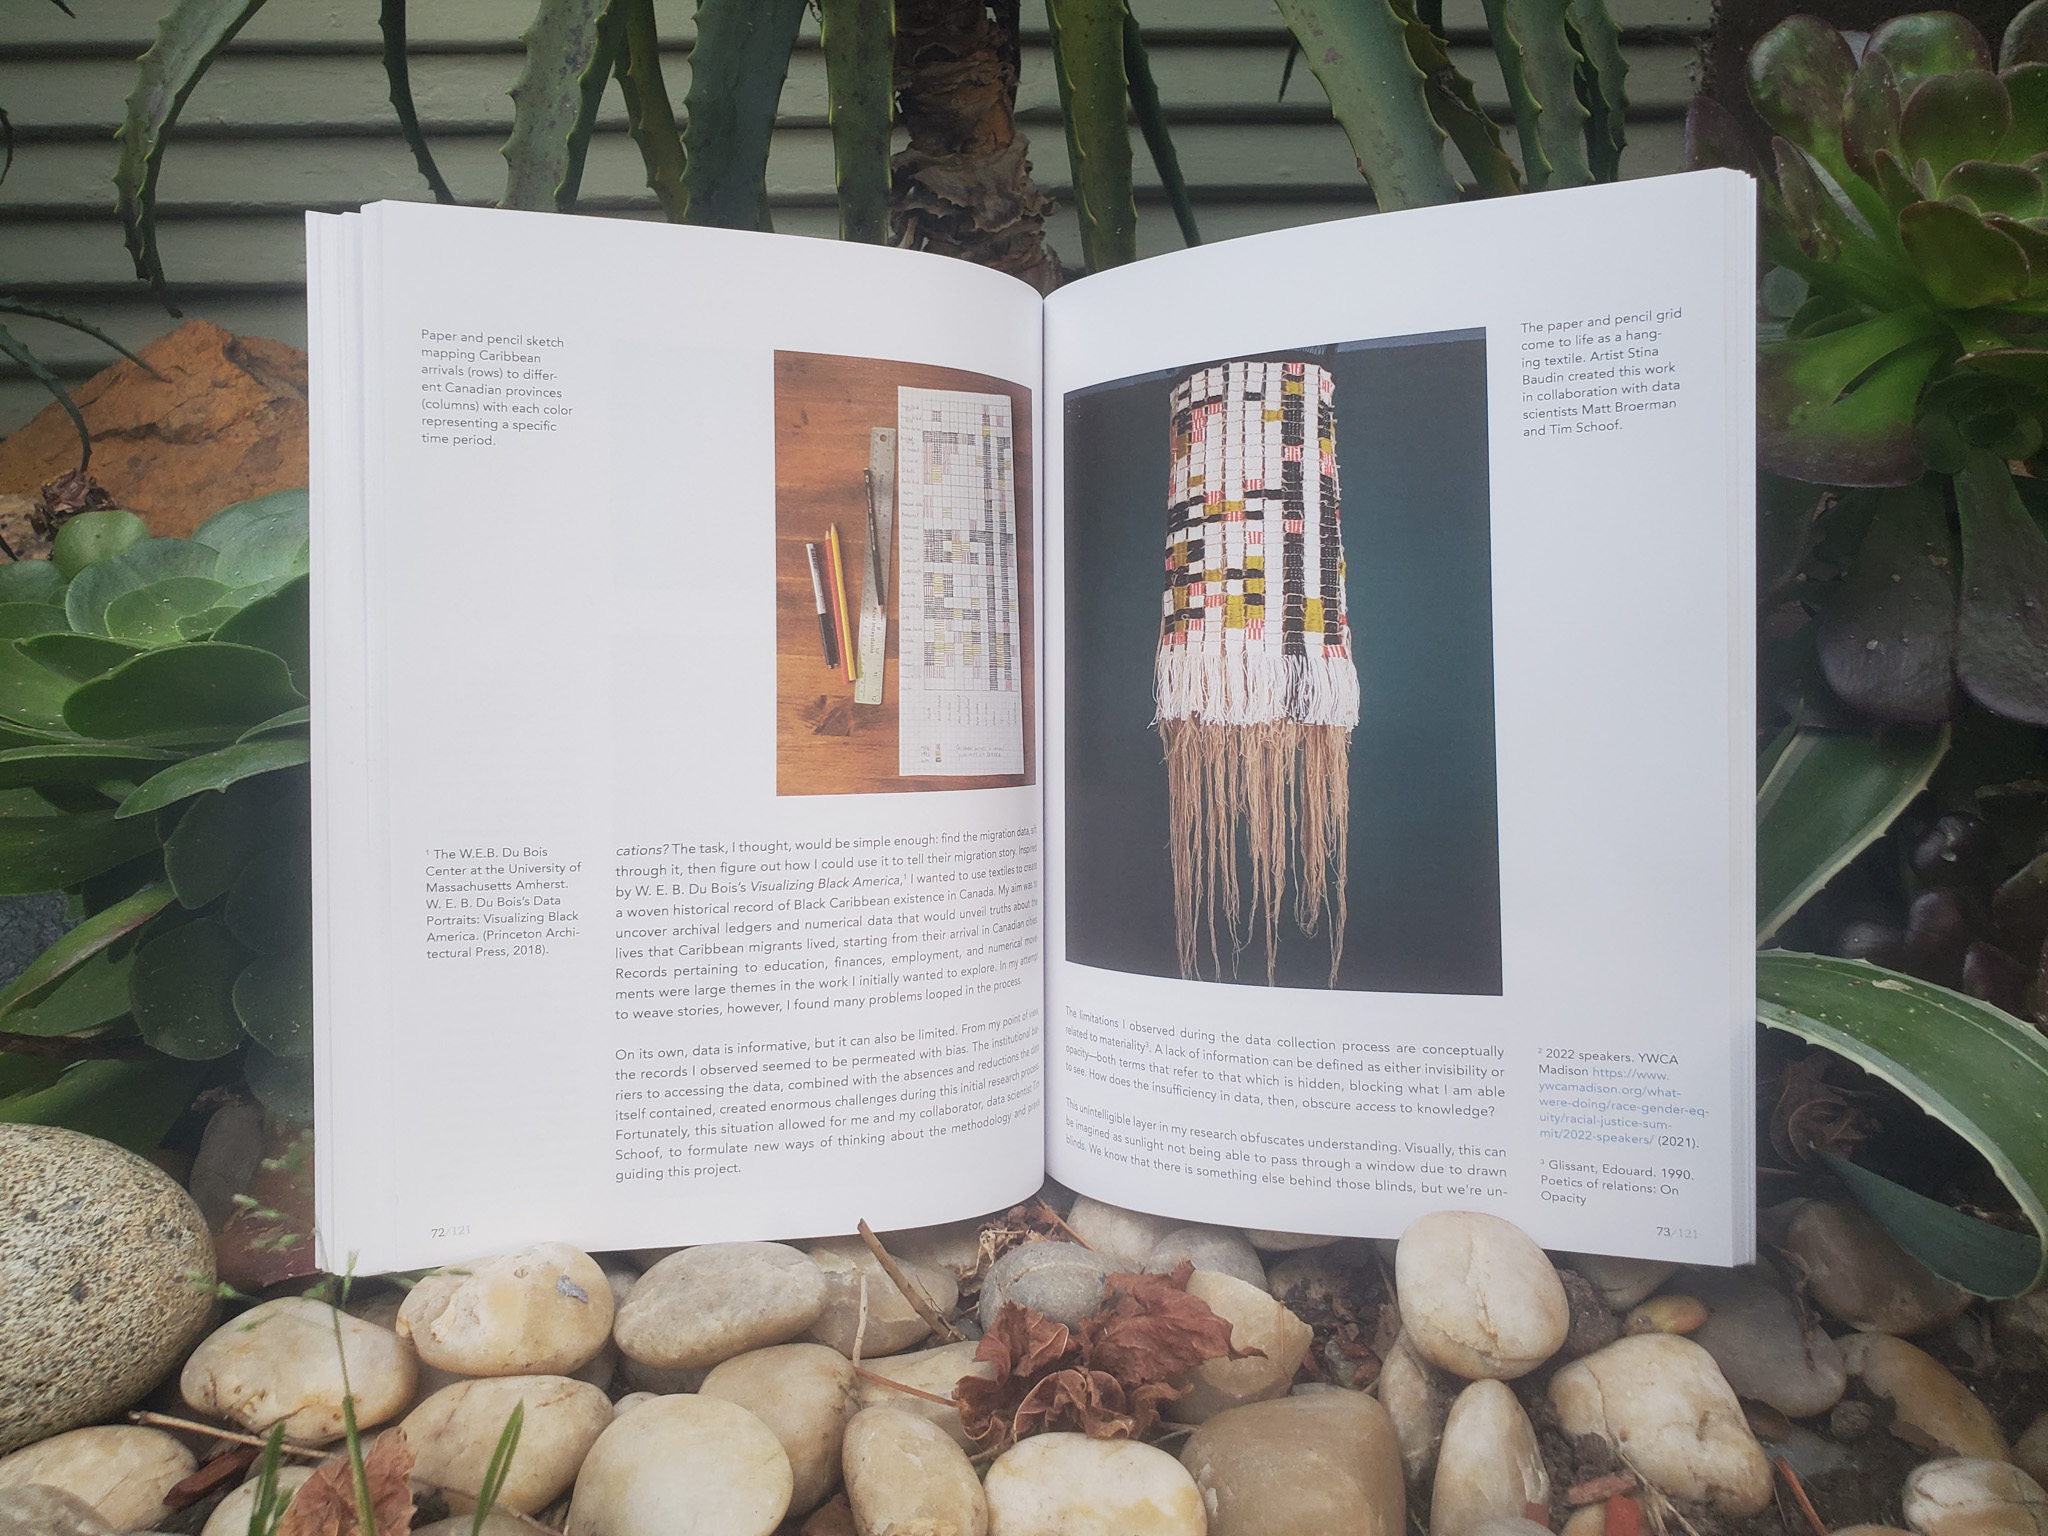 Photograph of an open book with two full page art works in a garden